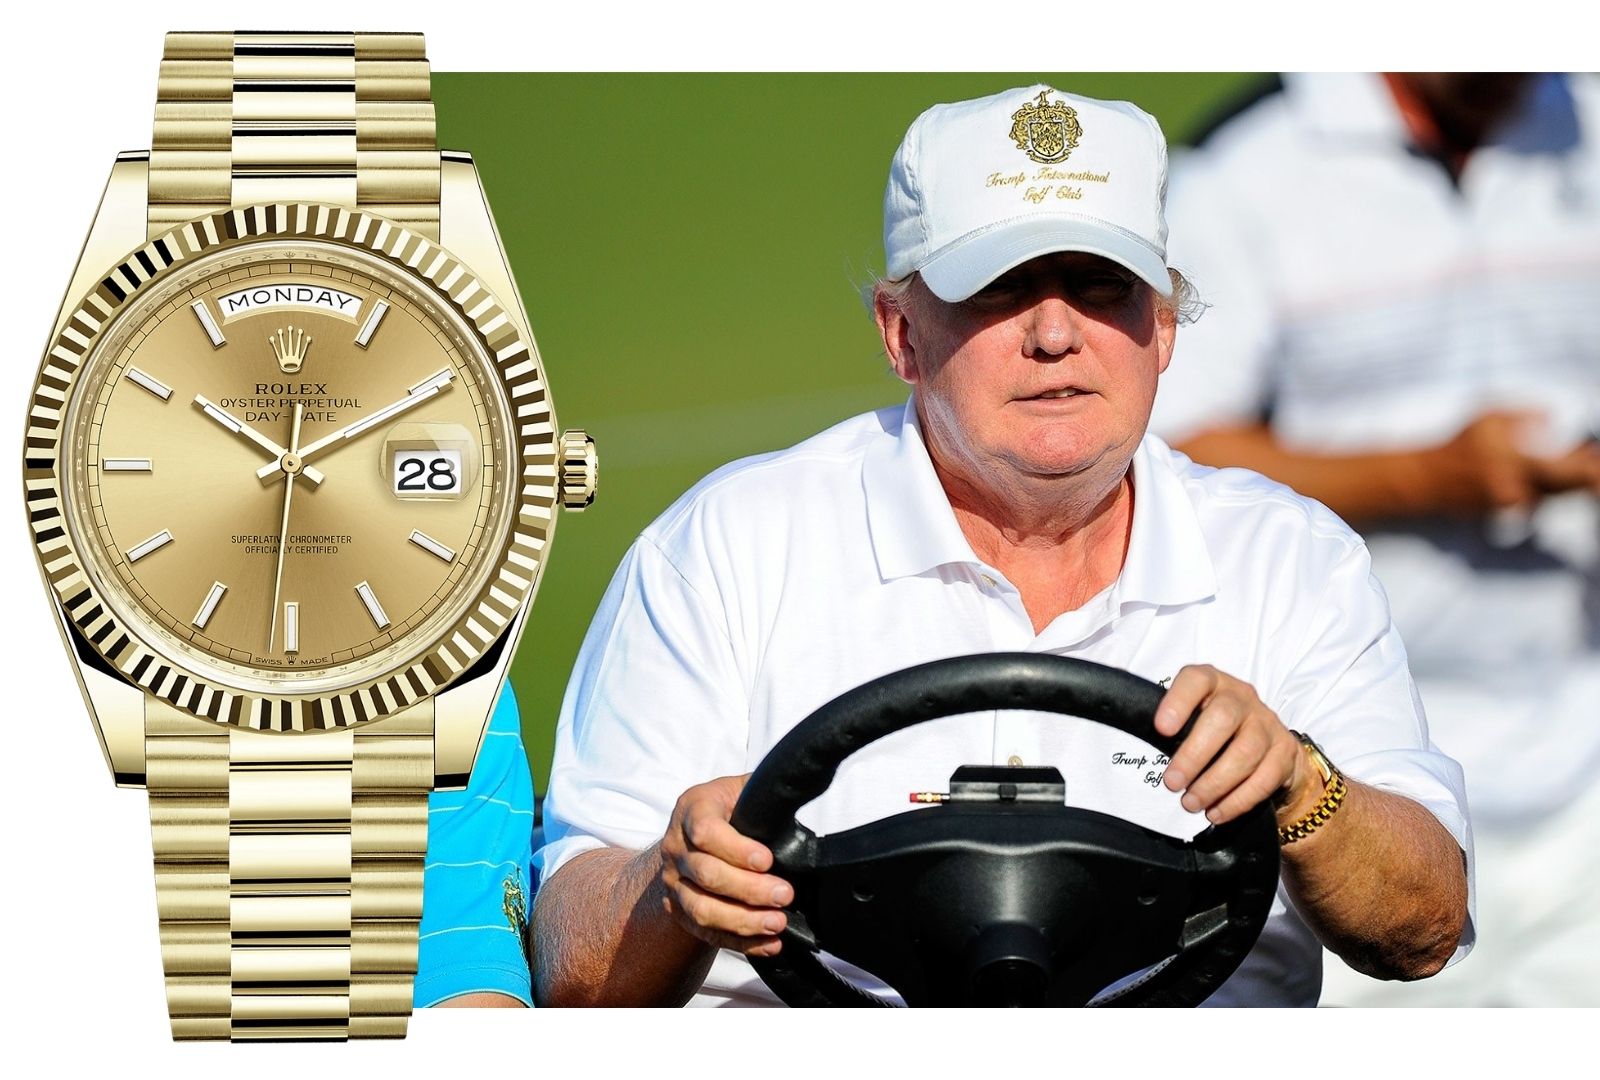 Donald Trump and his choice of wristwatch